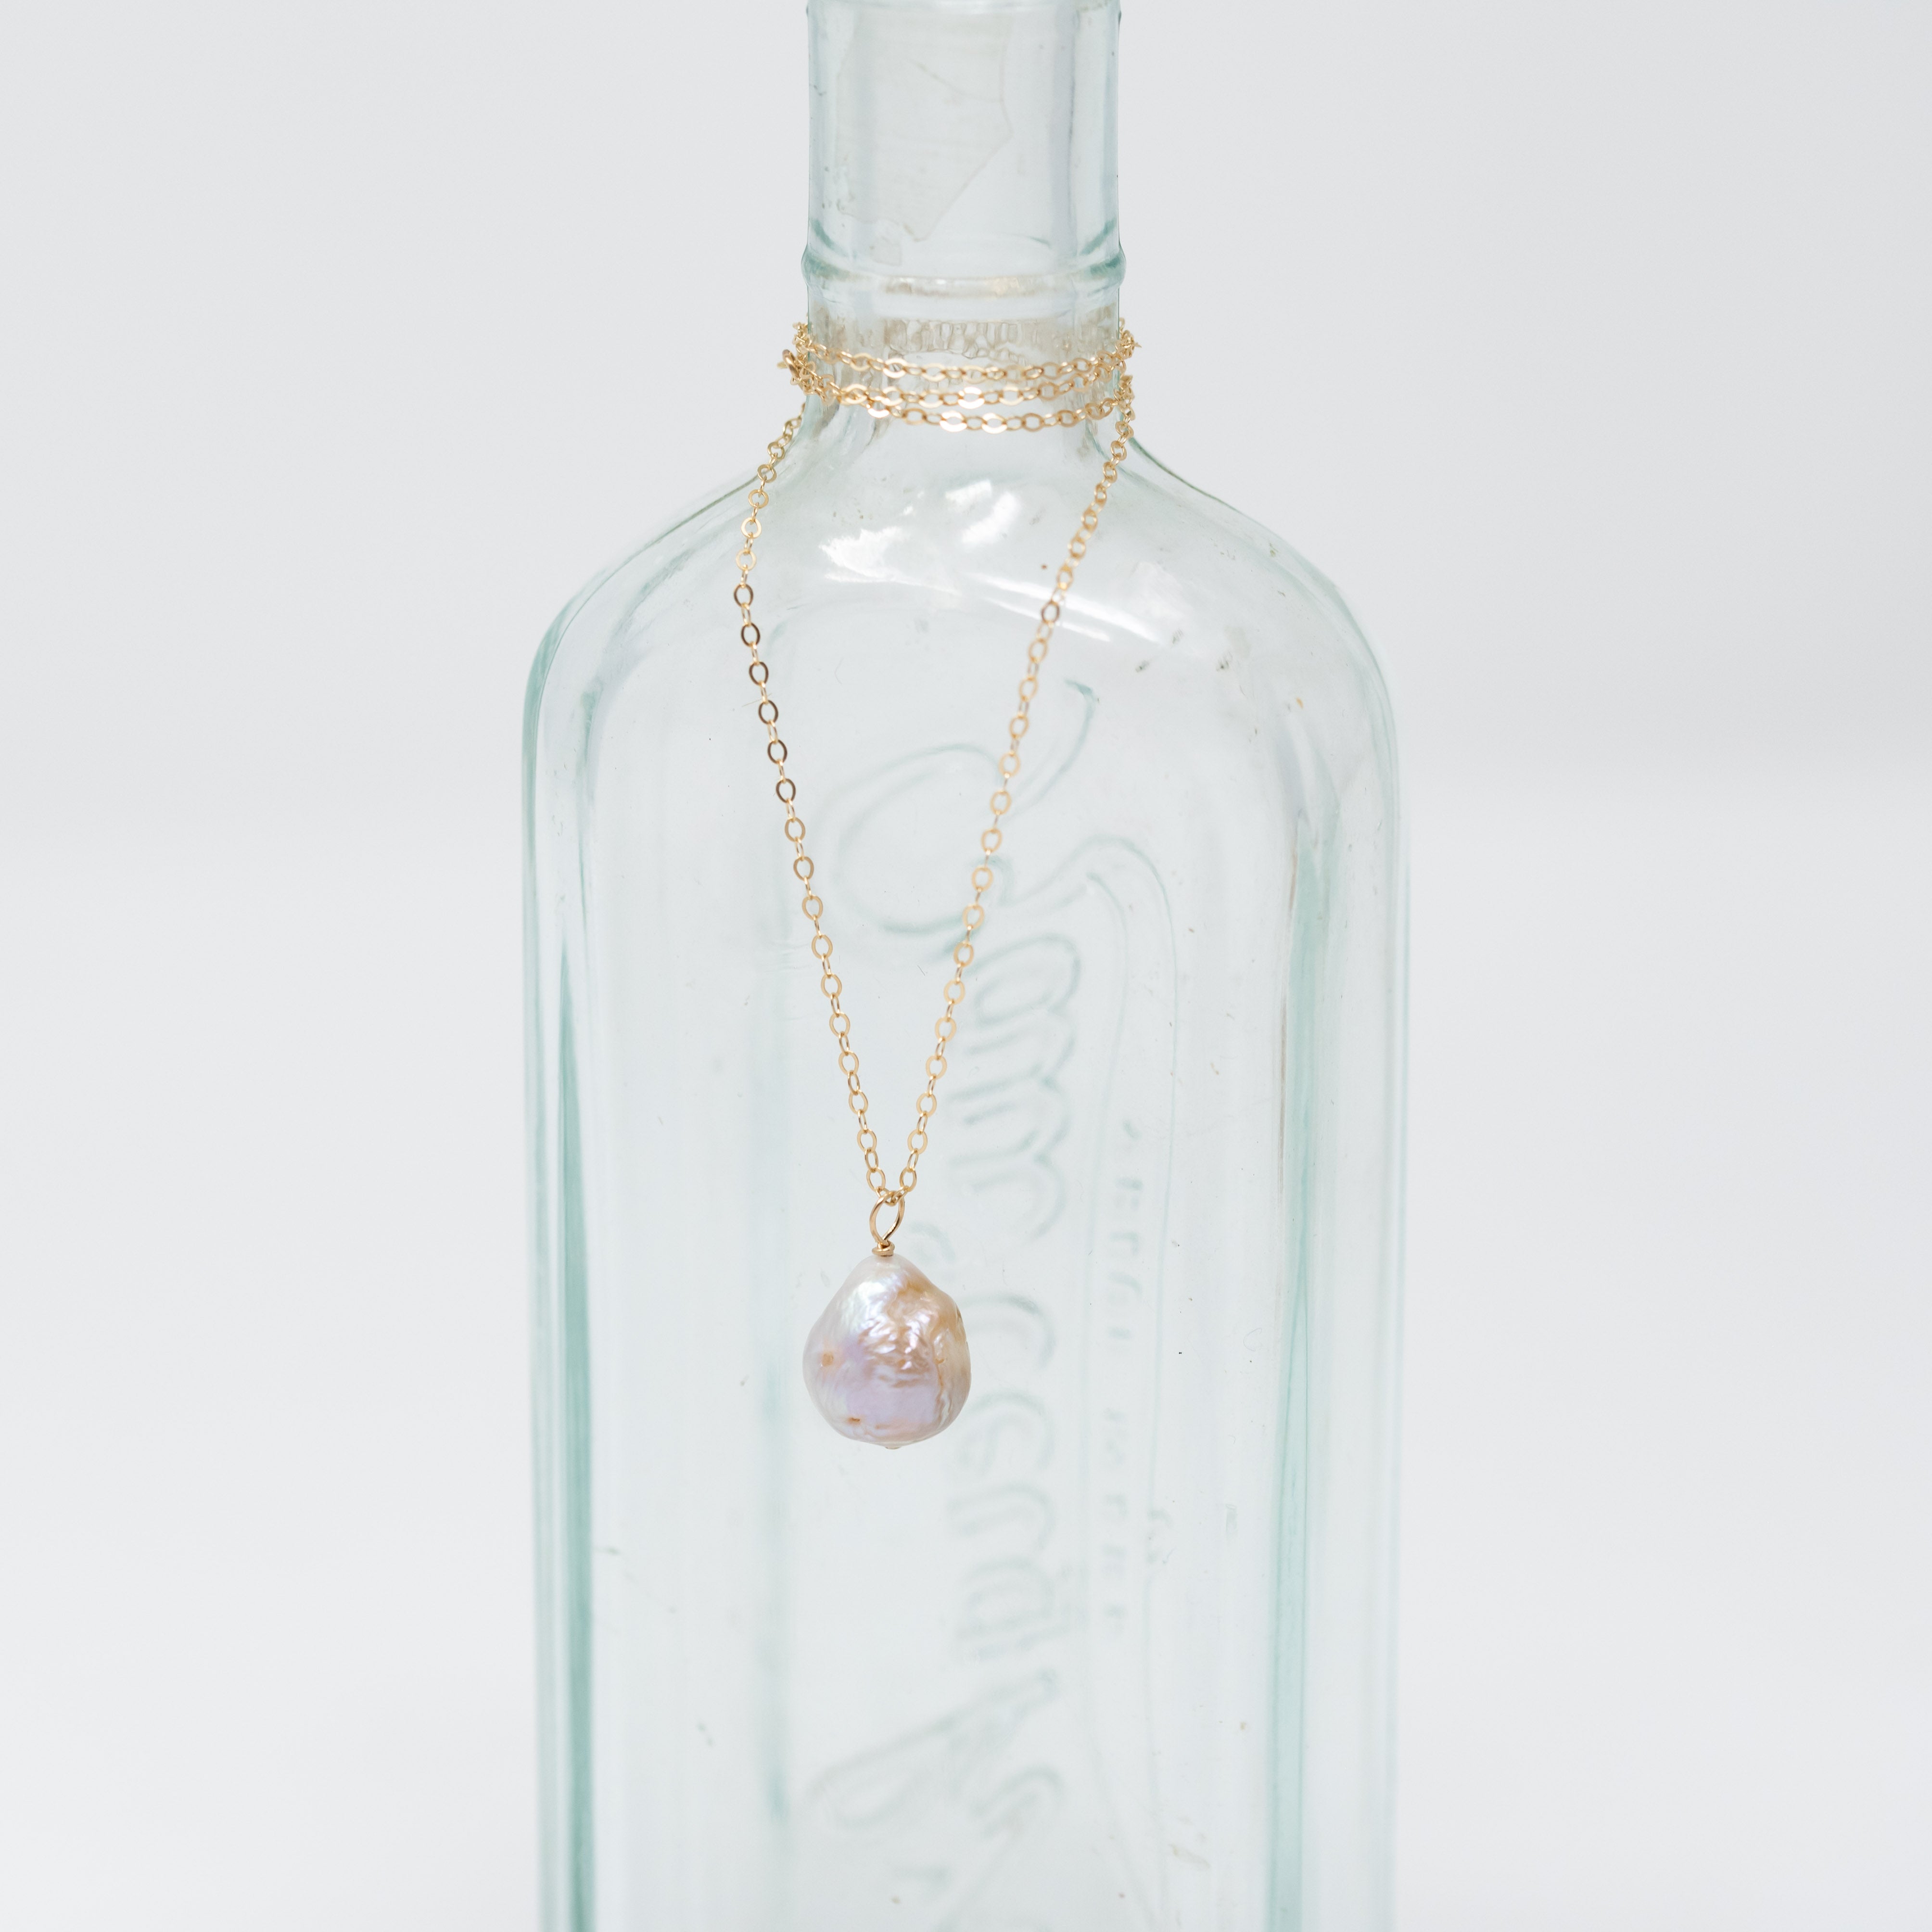 A blush colored pearl around the size of a dime hanging from a gold chain wrapped around a bottle.